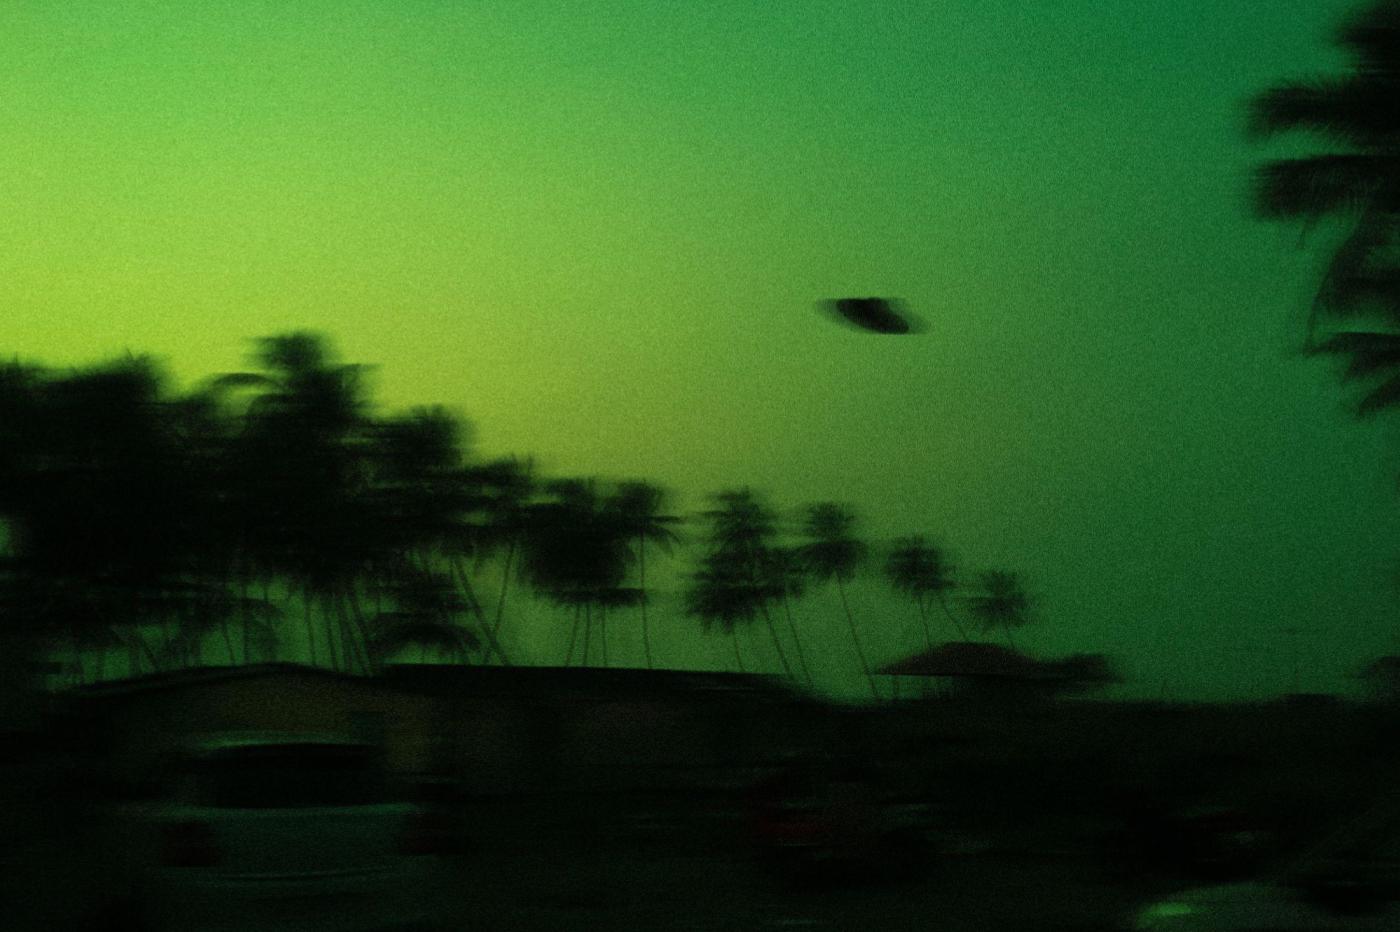 illustrative image of a ufo on a green background